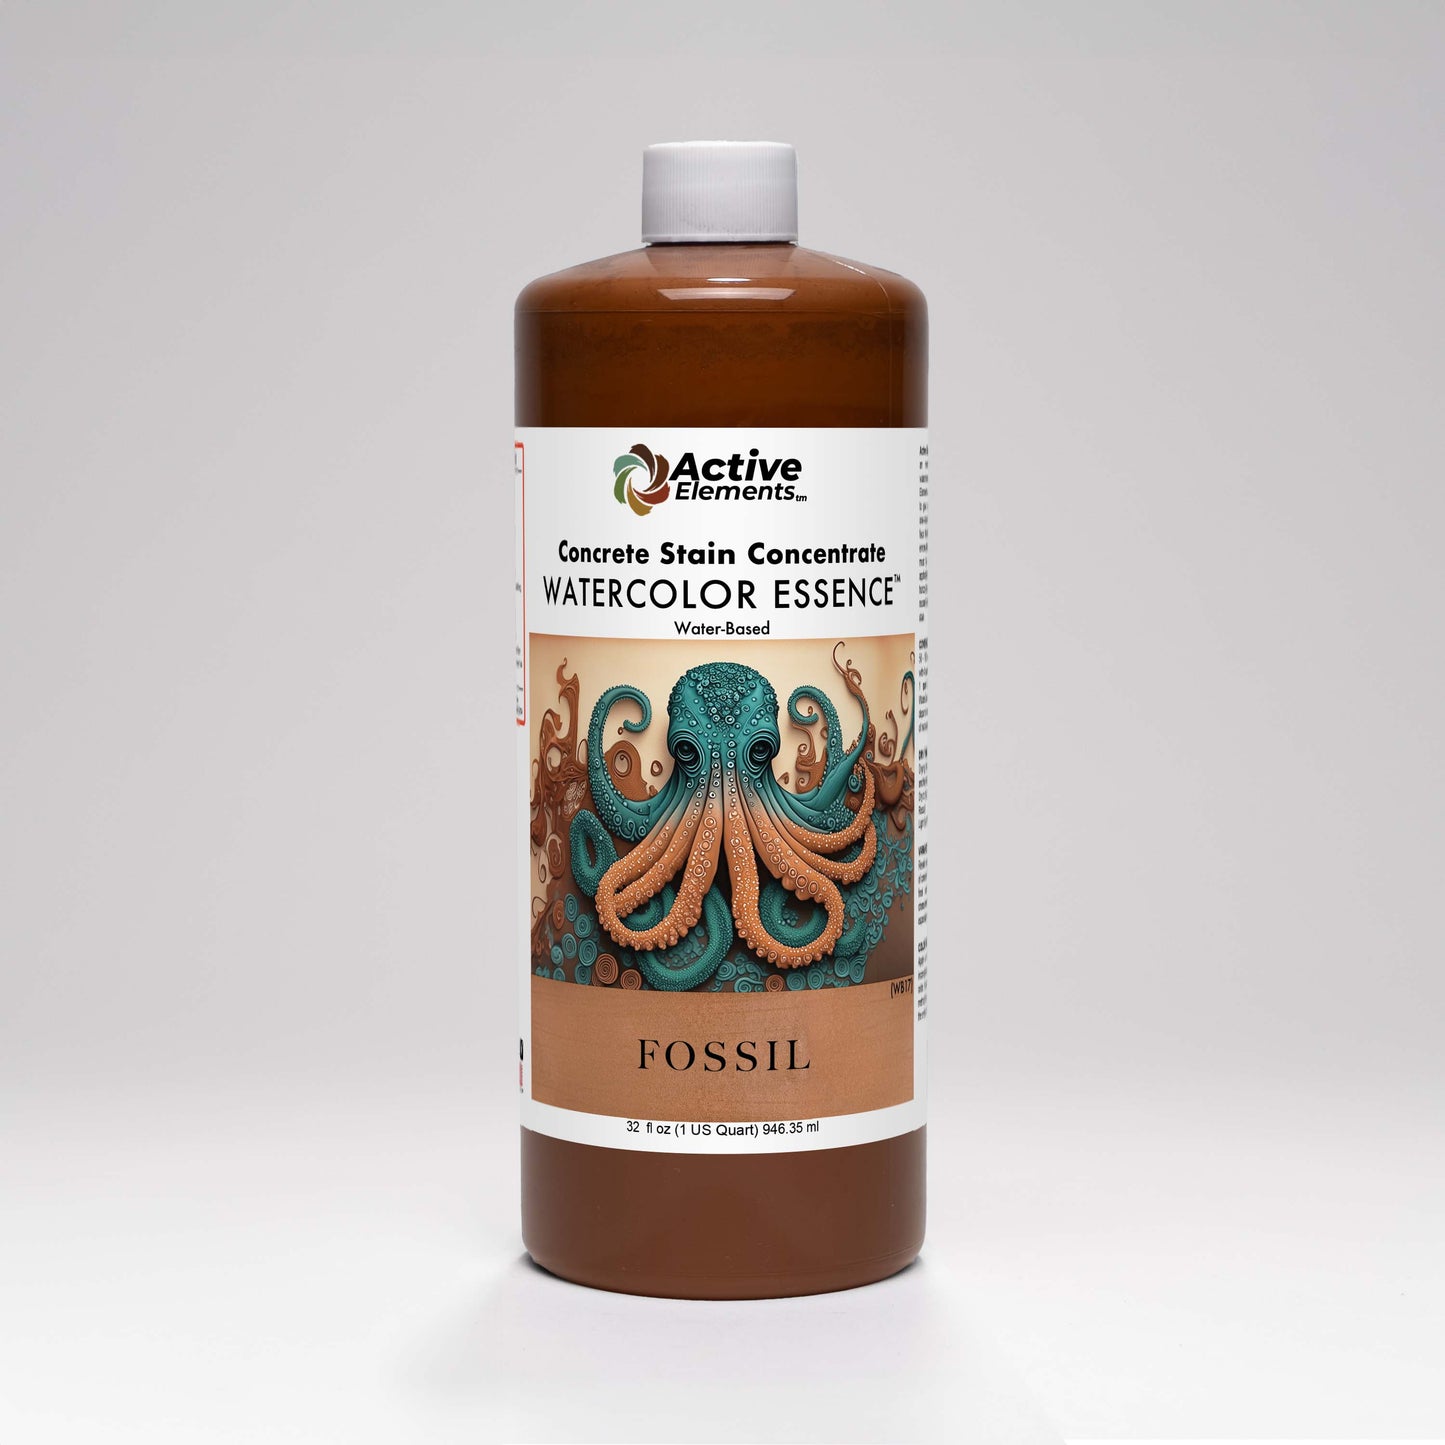 WaterColor Essence | Concrete Stain Concentrate | Fossil